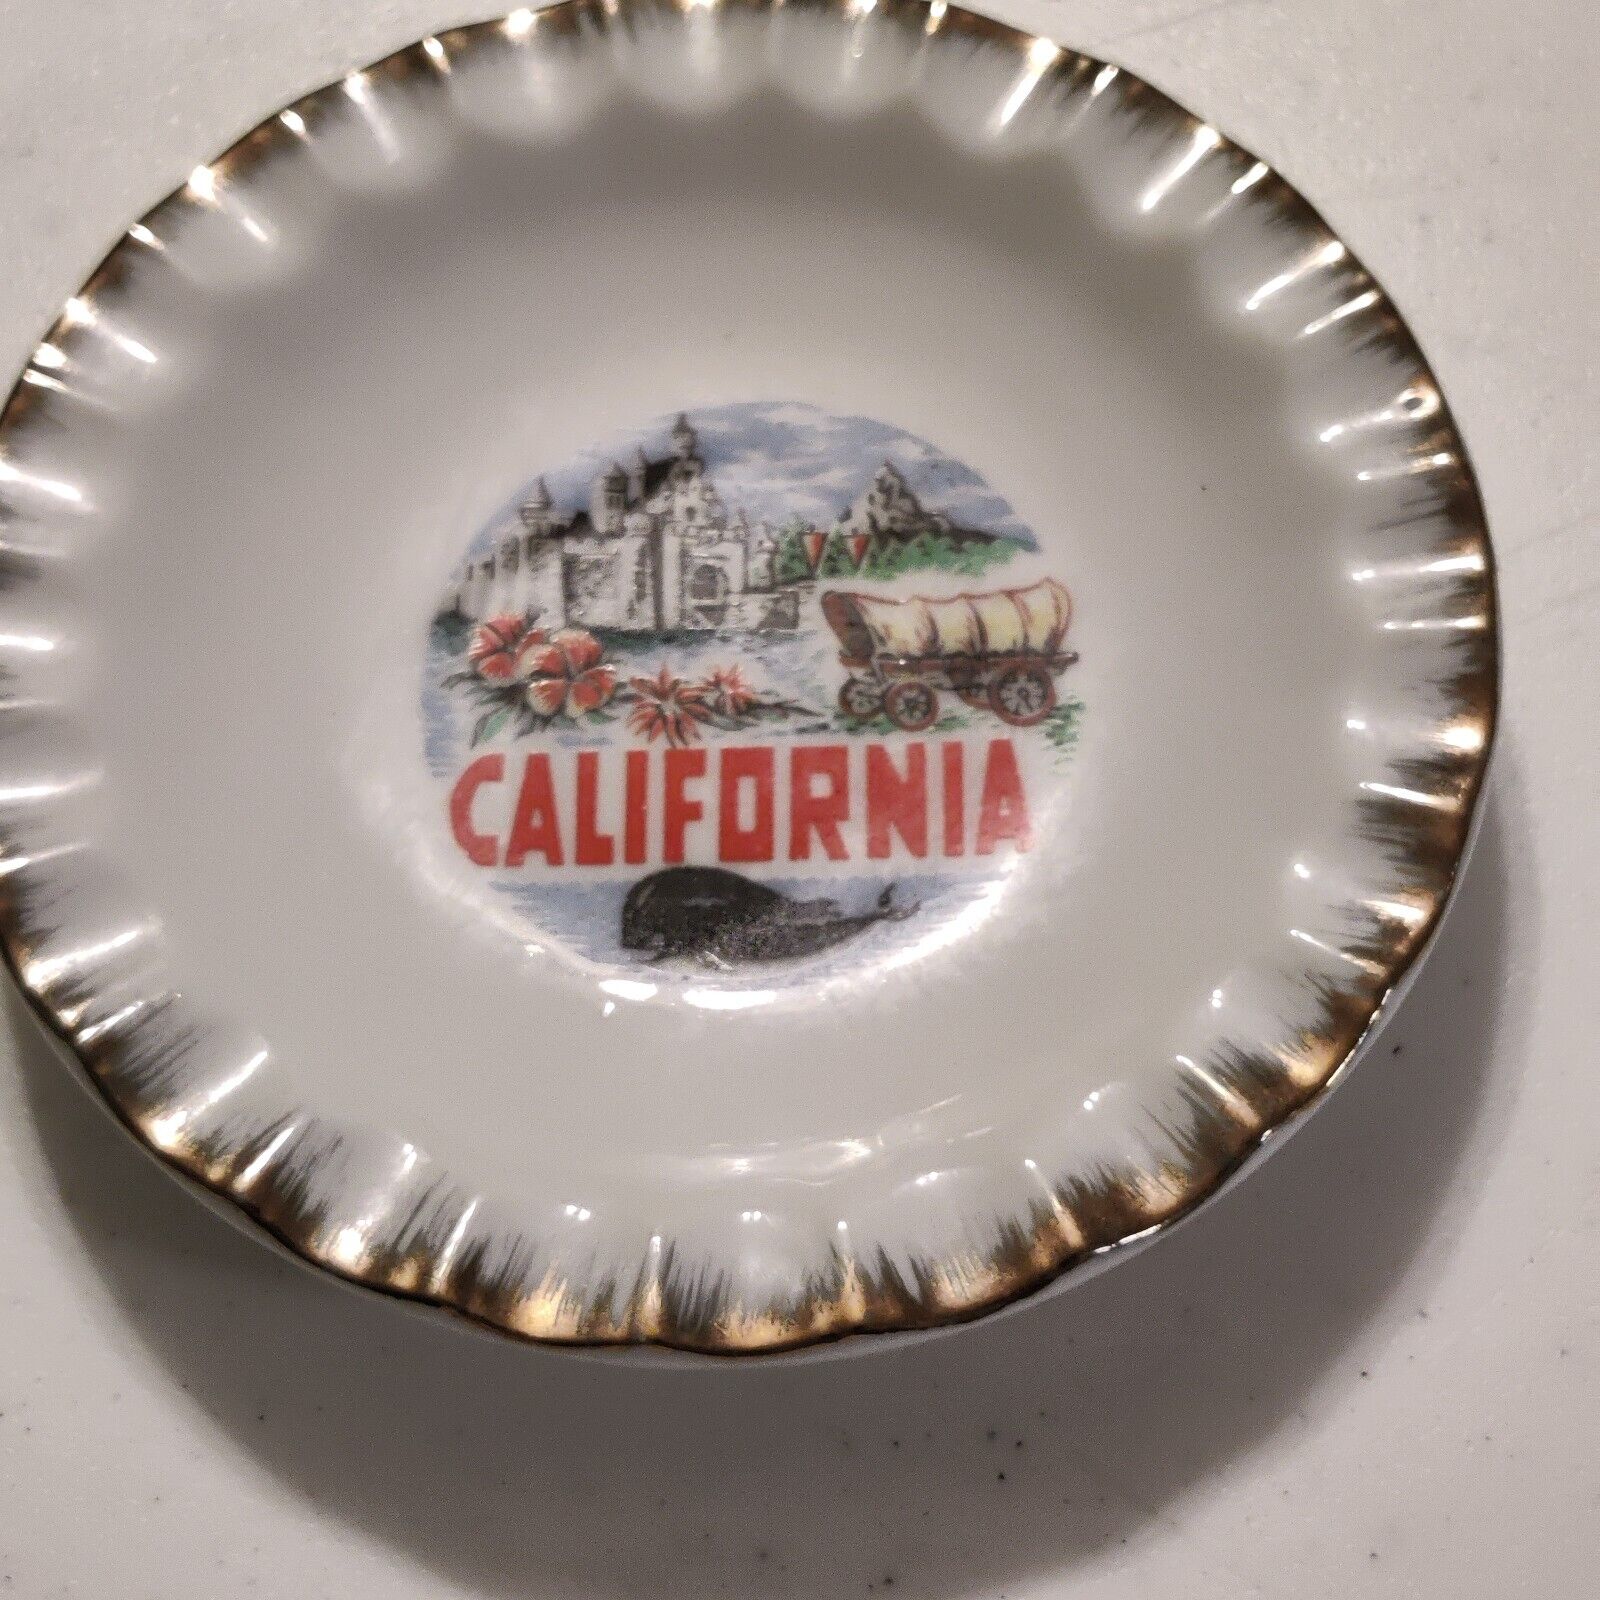 Vintage California Souvenir Small State Plate Saucer Small Decorative Collector